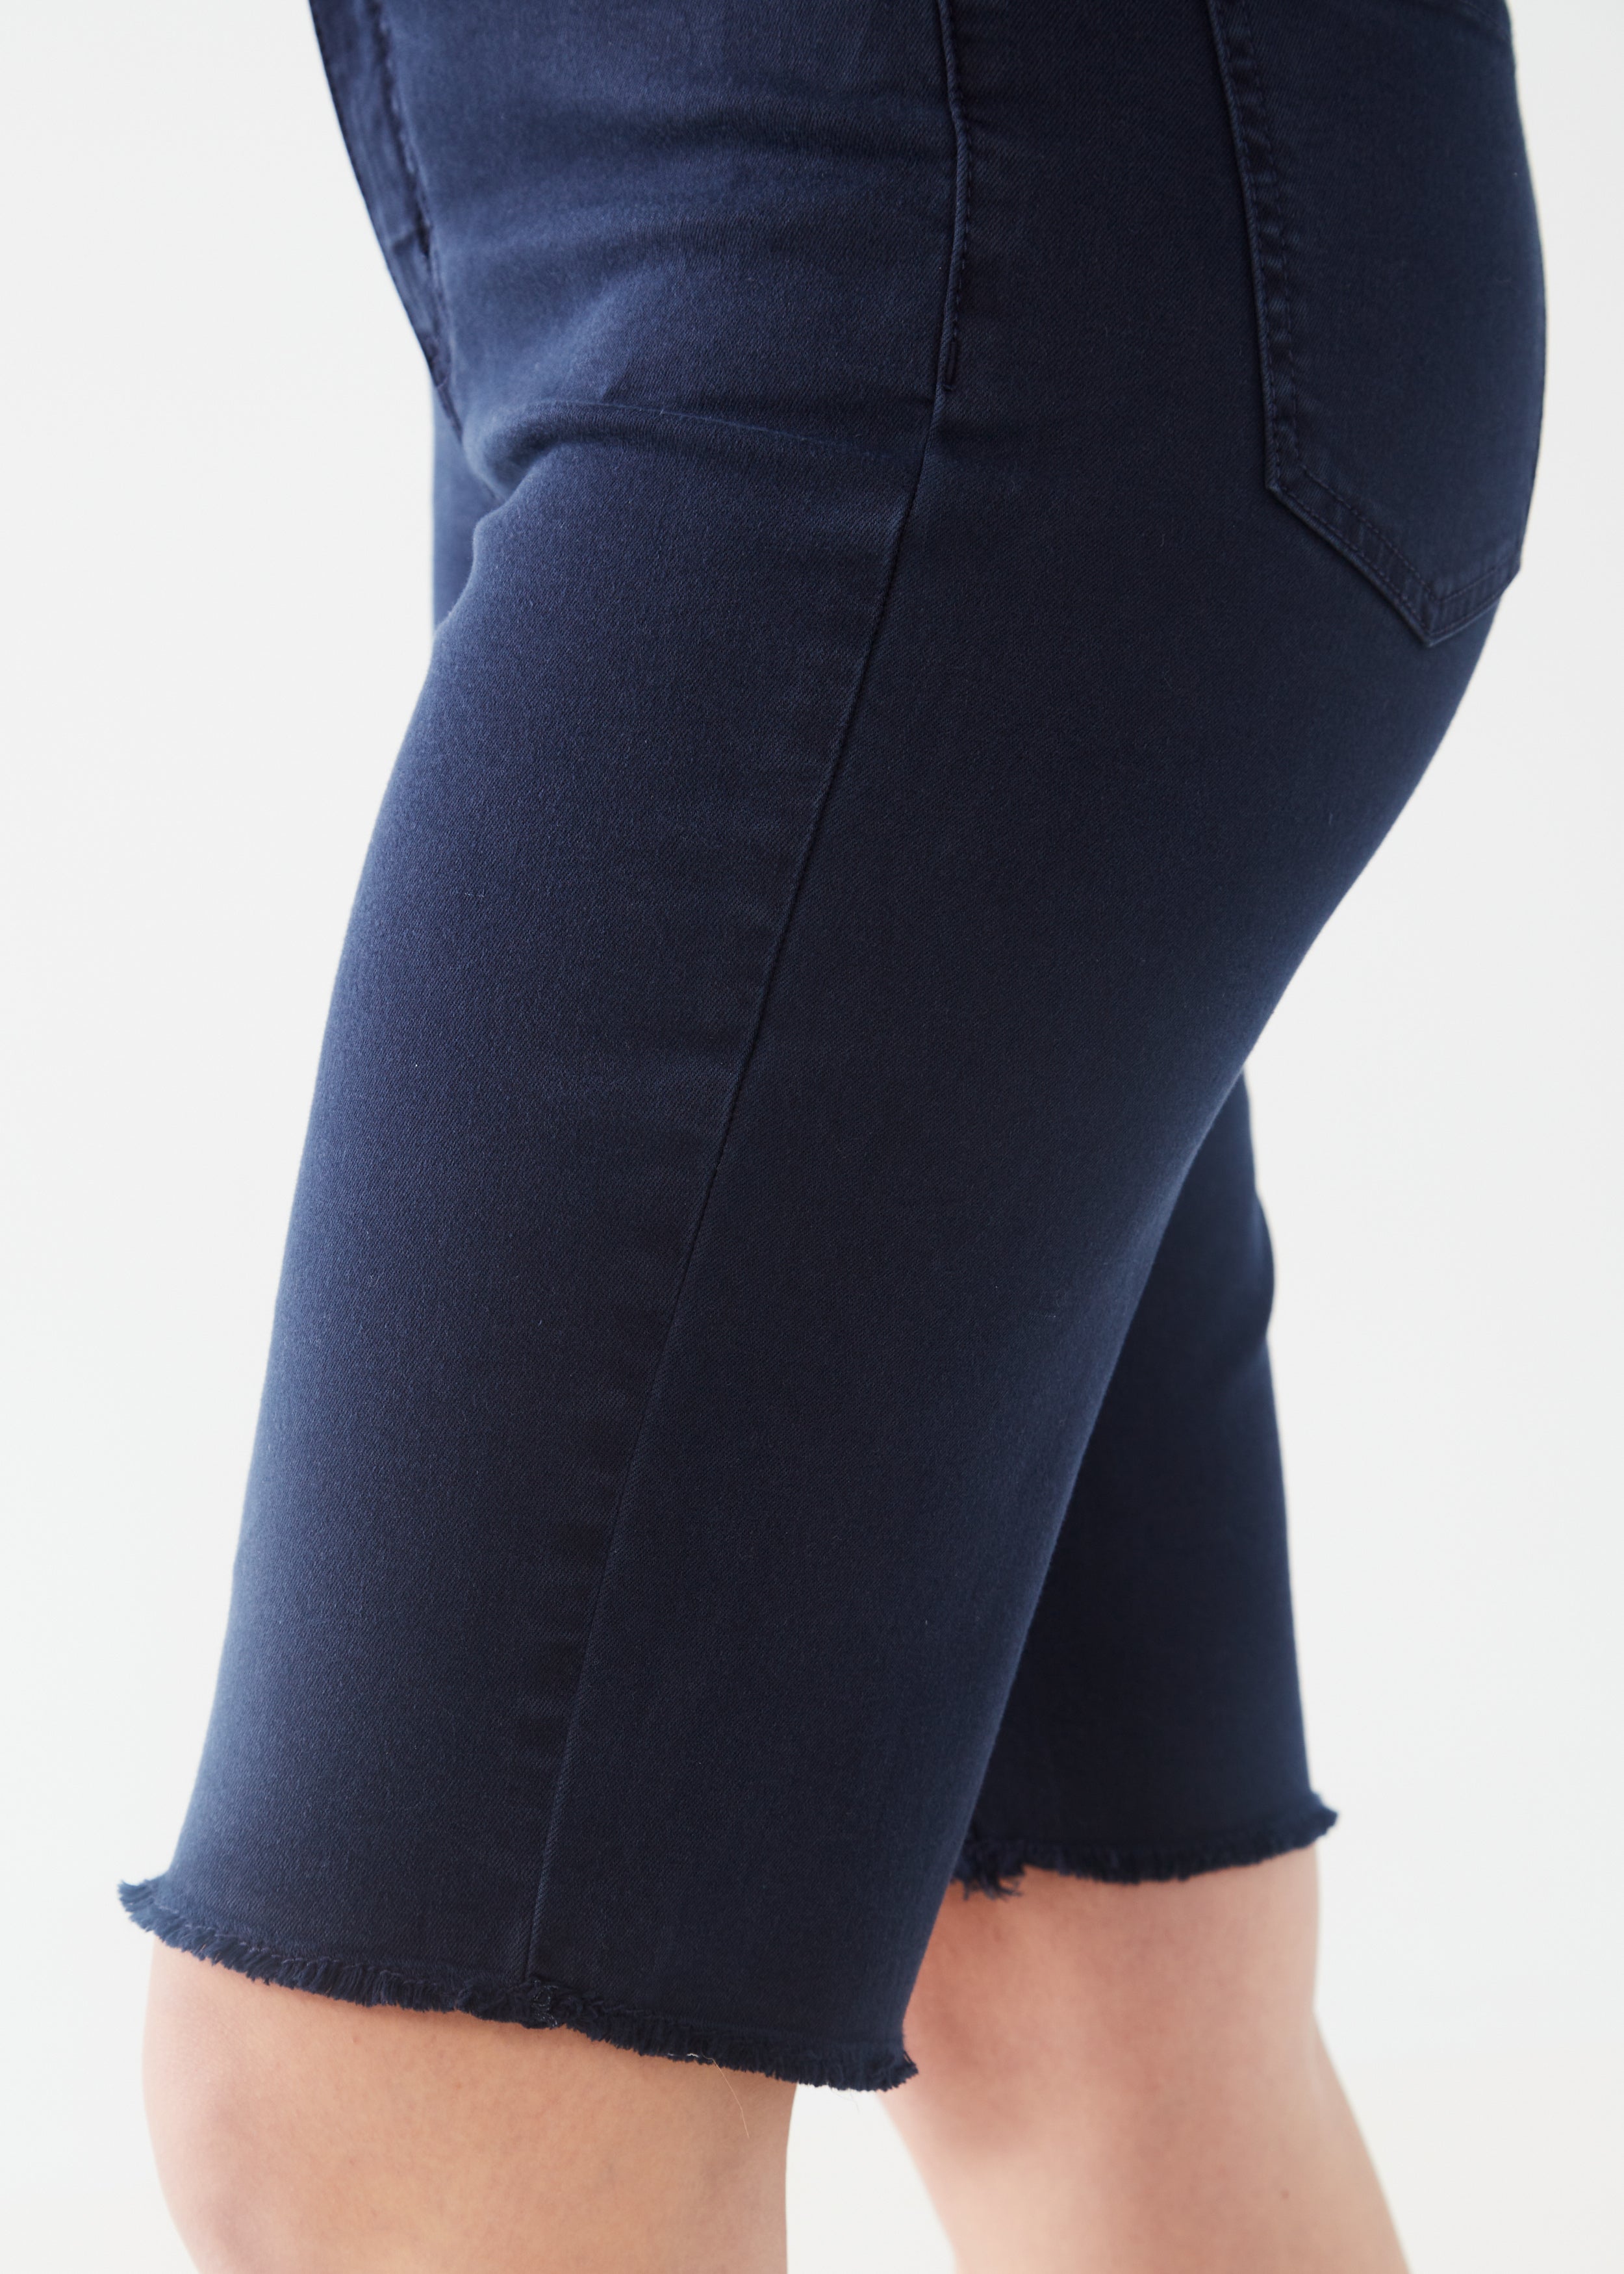 Effortlessly stylish and comfortable, the FDJ Suzanne Bermuda Short in navy is a must-have for any wardrobe.